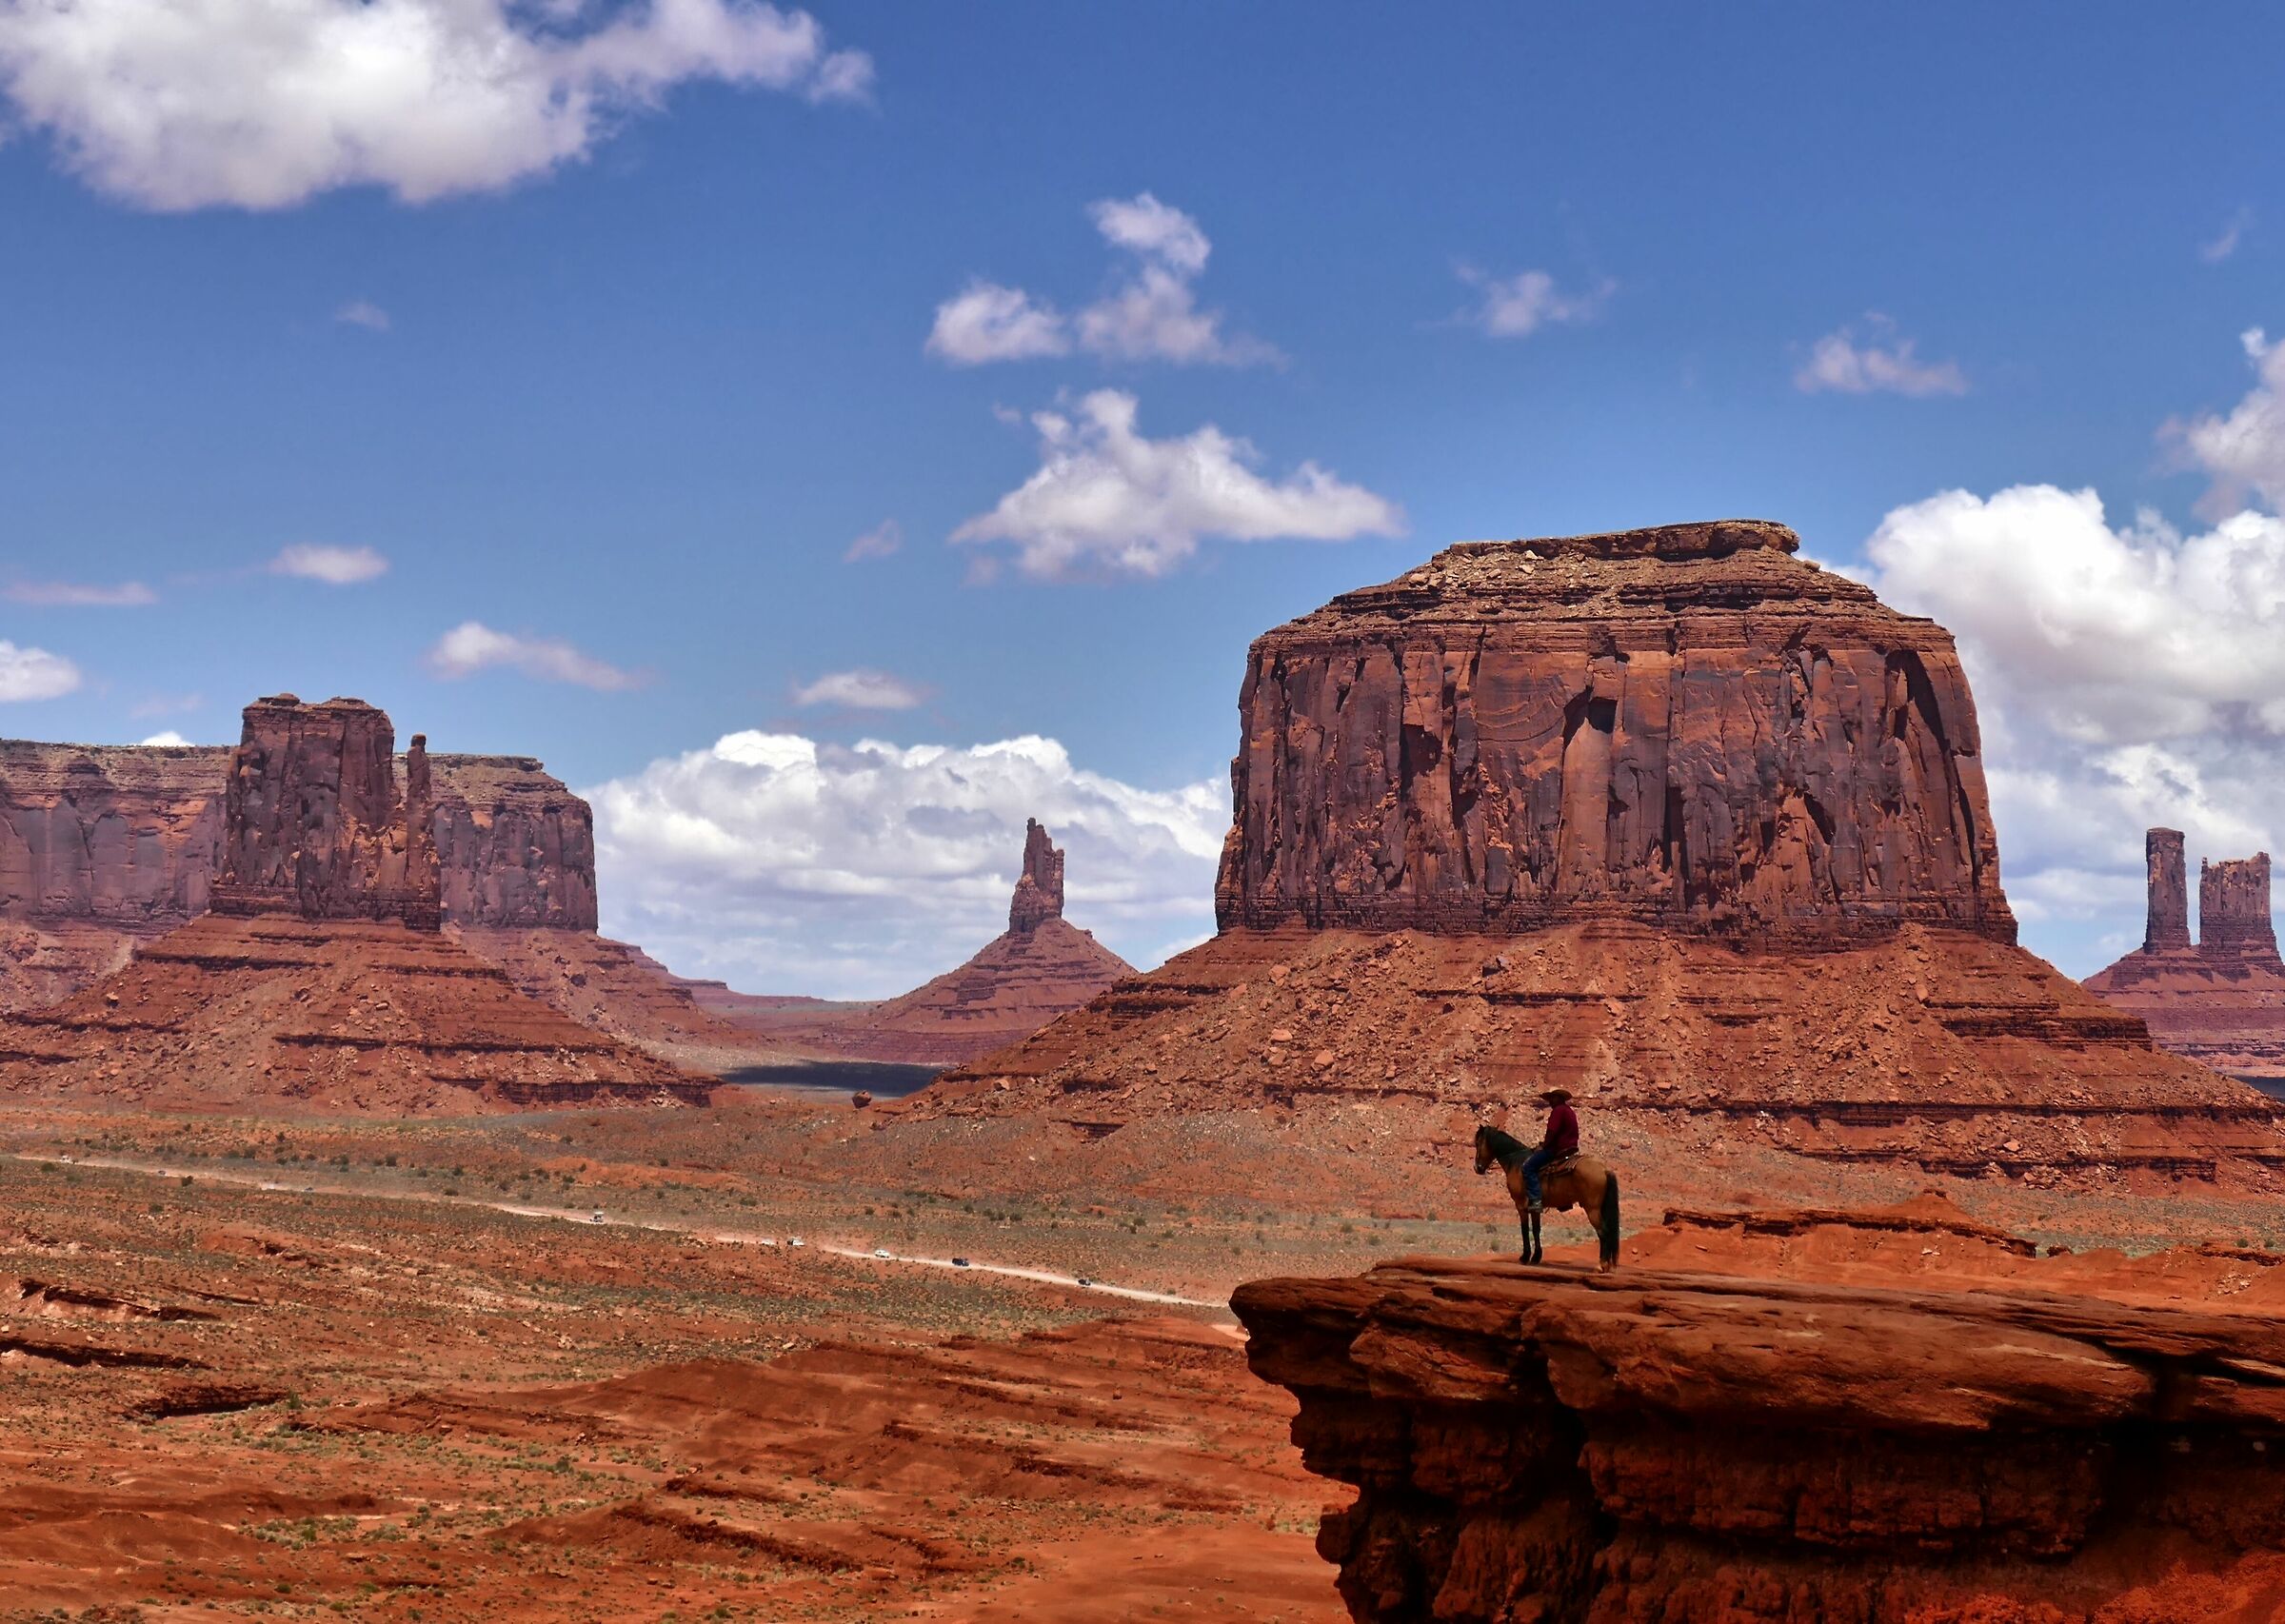 John Ford's Point (Monument Valley)...